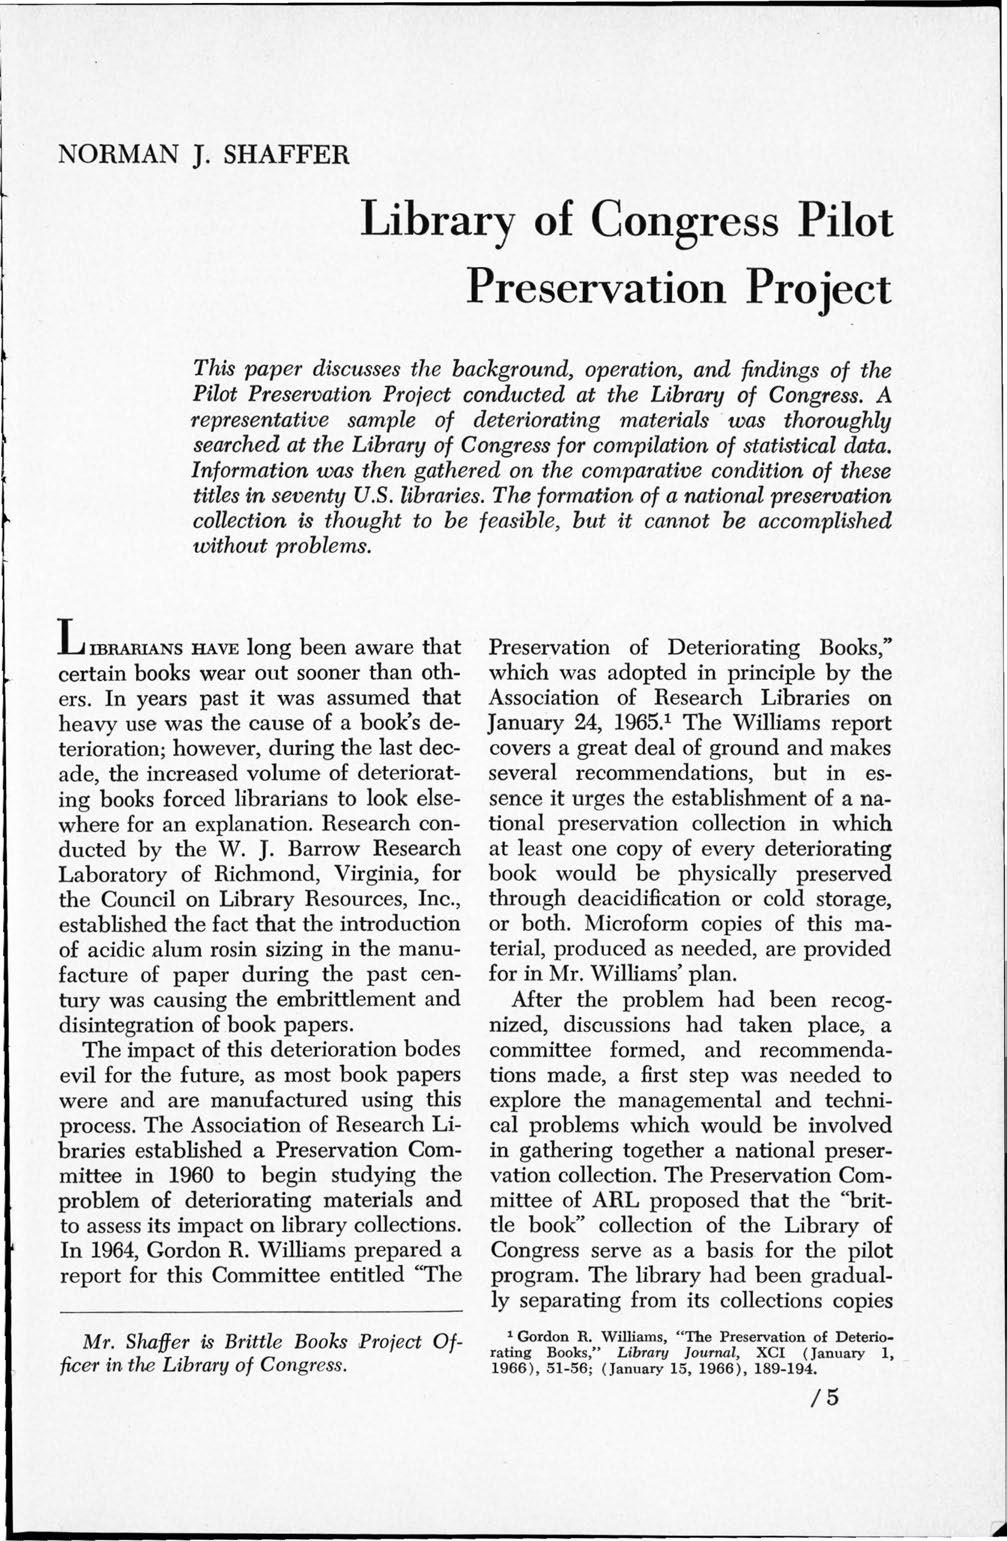 NORMAN J. SHAFFER Library of Congress Pilot Preservation Project This paper discusses the background, operation, and findings of the Pilot Preservation Project conducted at the Library of Congress.